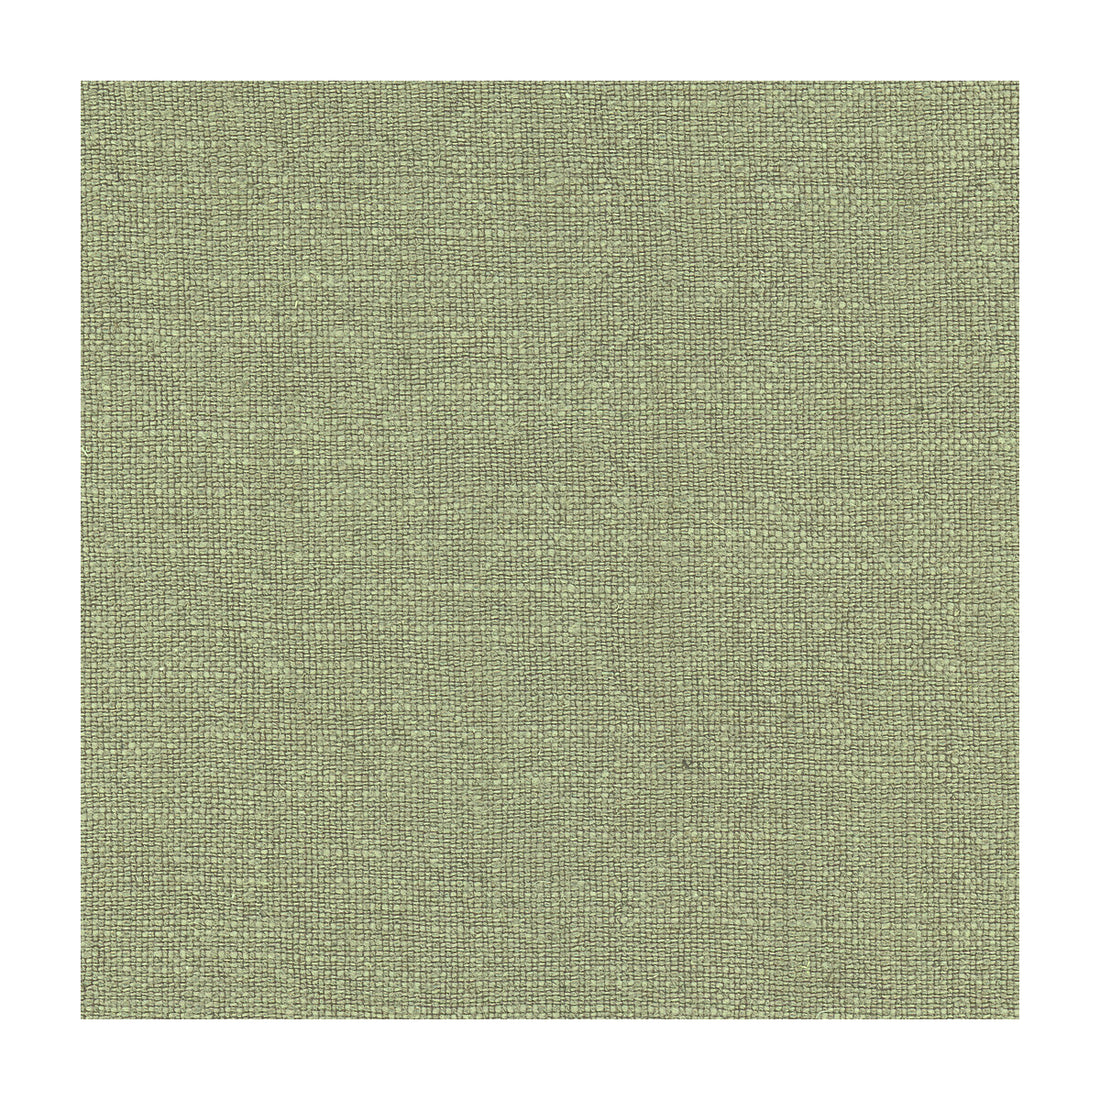 Kravet Basics fabric in 32612-11 color - pattern 32612.11.0 - by Kravet Basics in the Perfect Plains collection